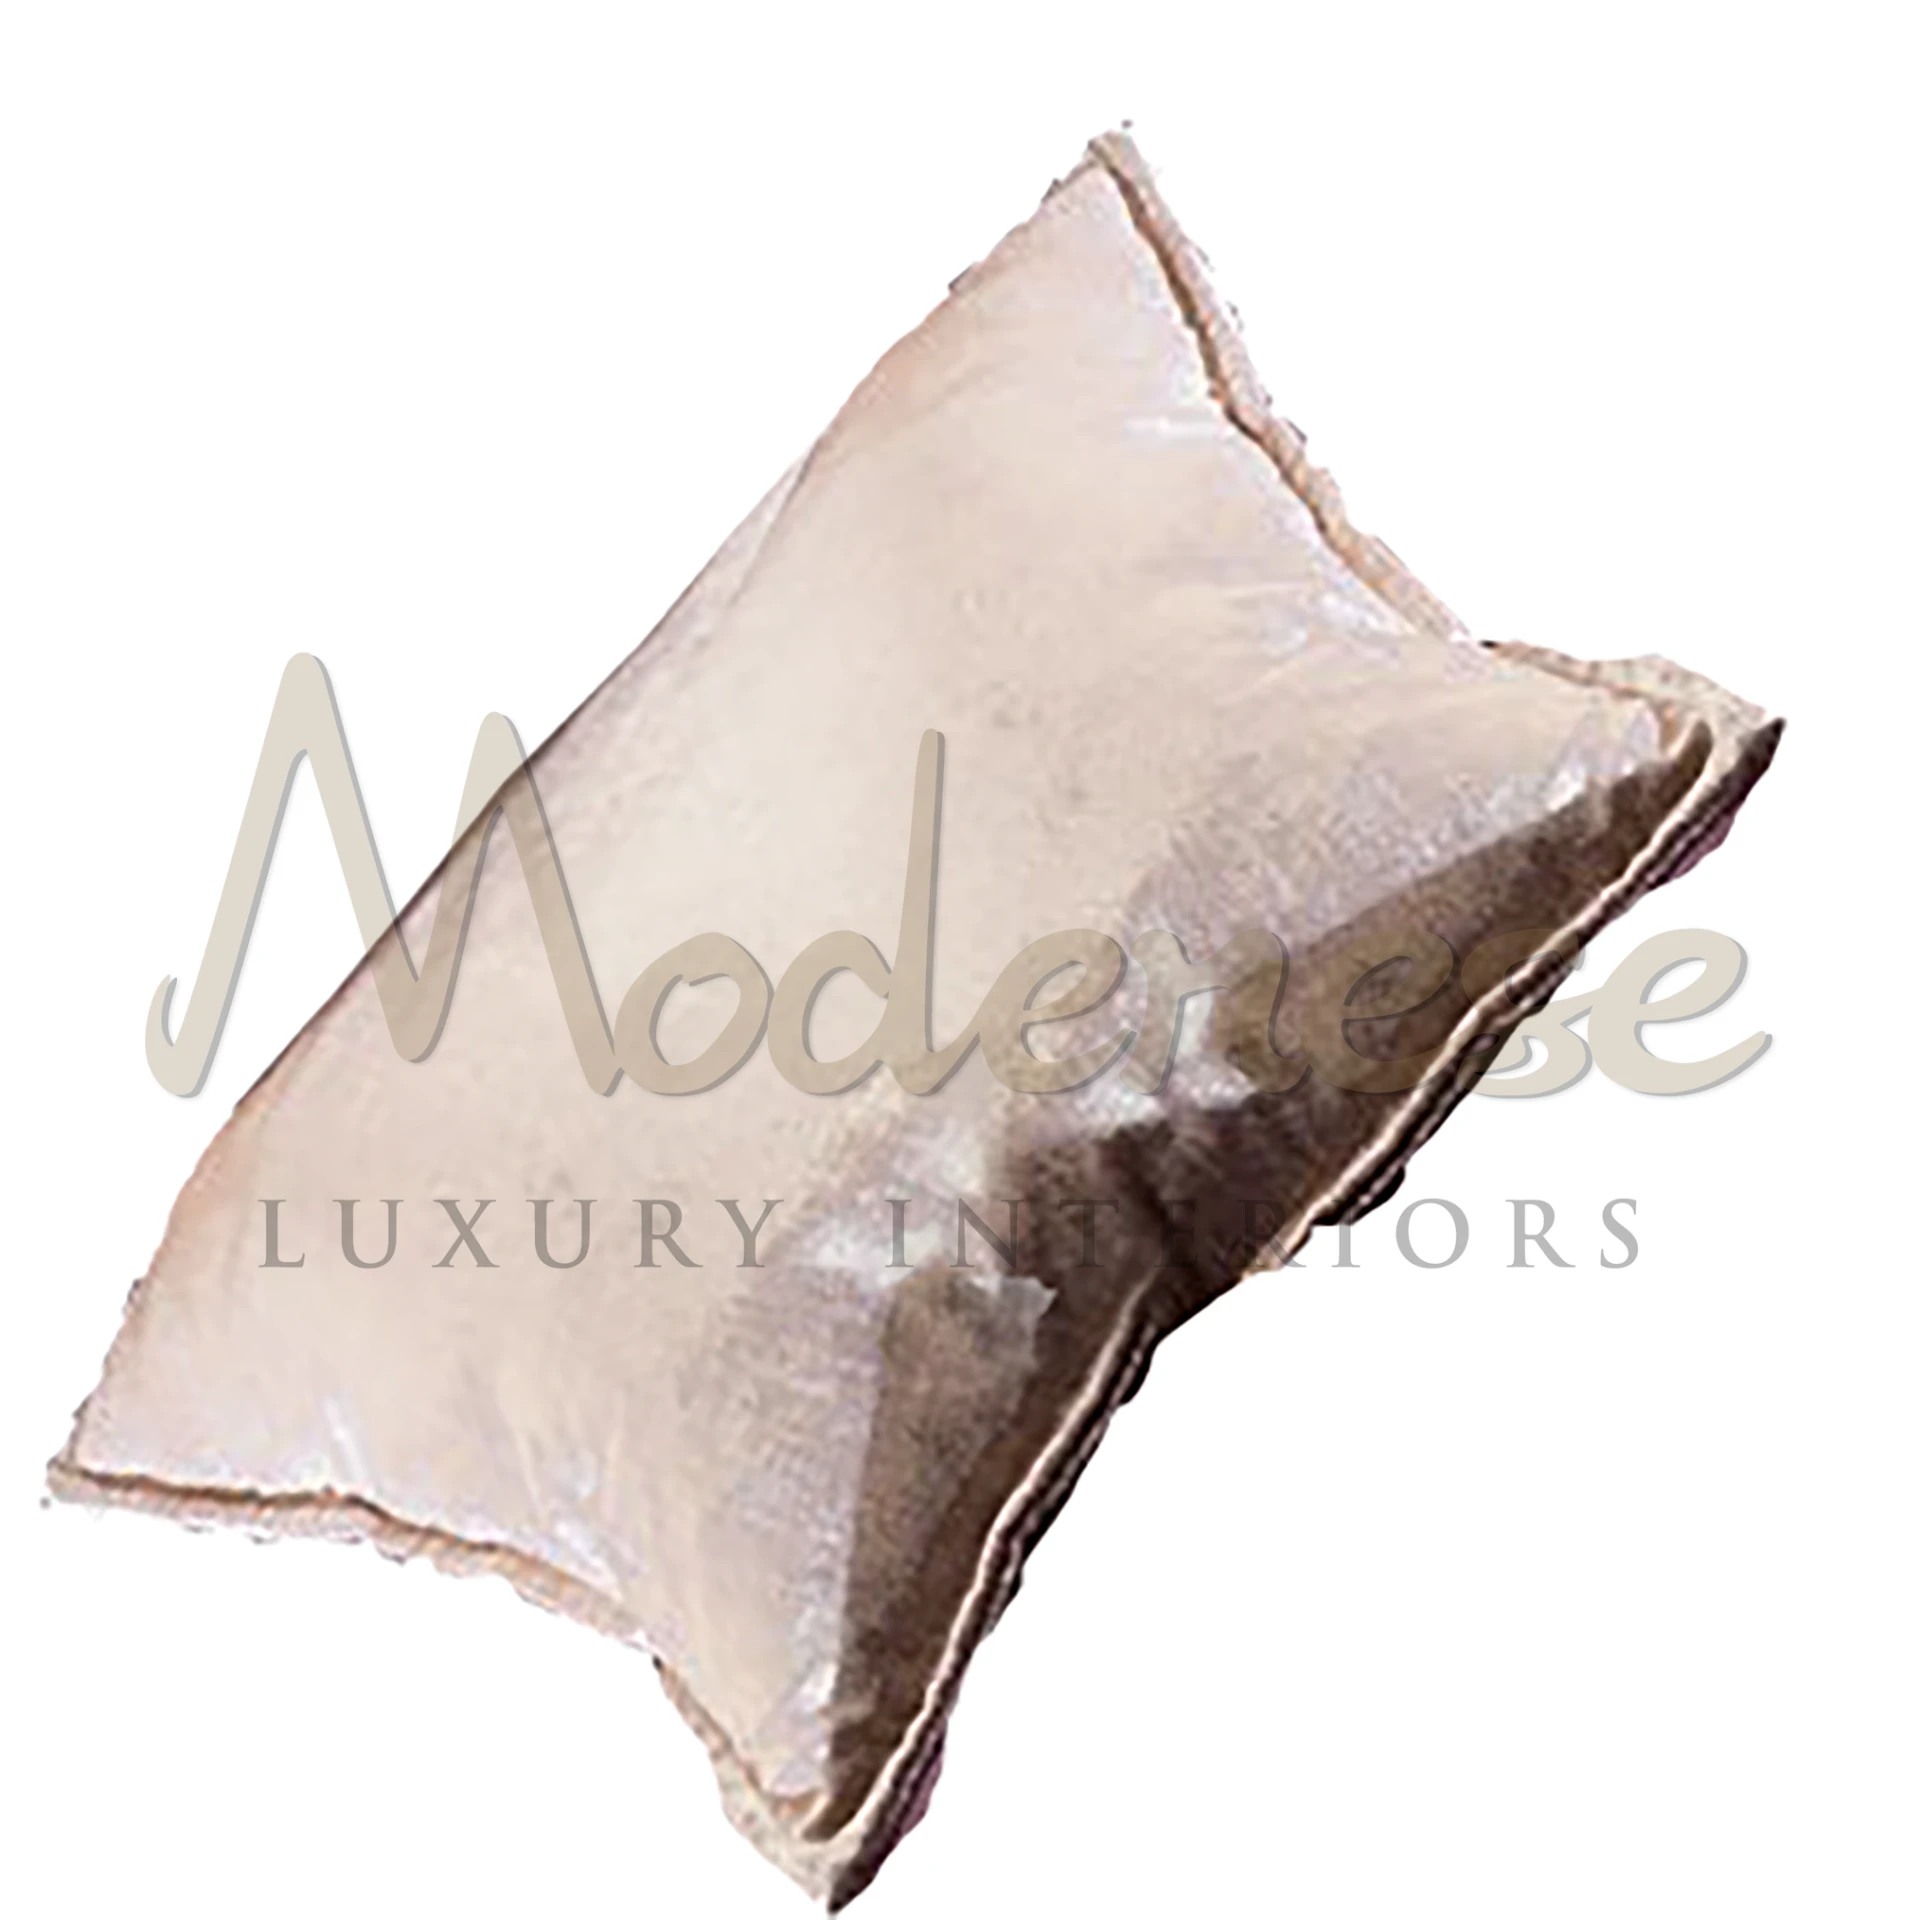 Luxury cushion from Italy: Noble Classical Pillow with elegant scrolls and medallions, enhancing interior design with class.